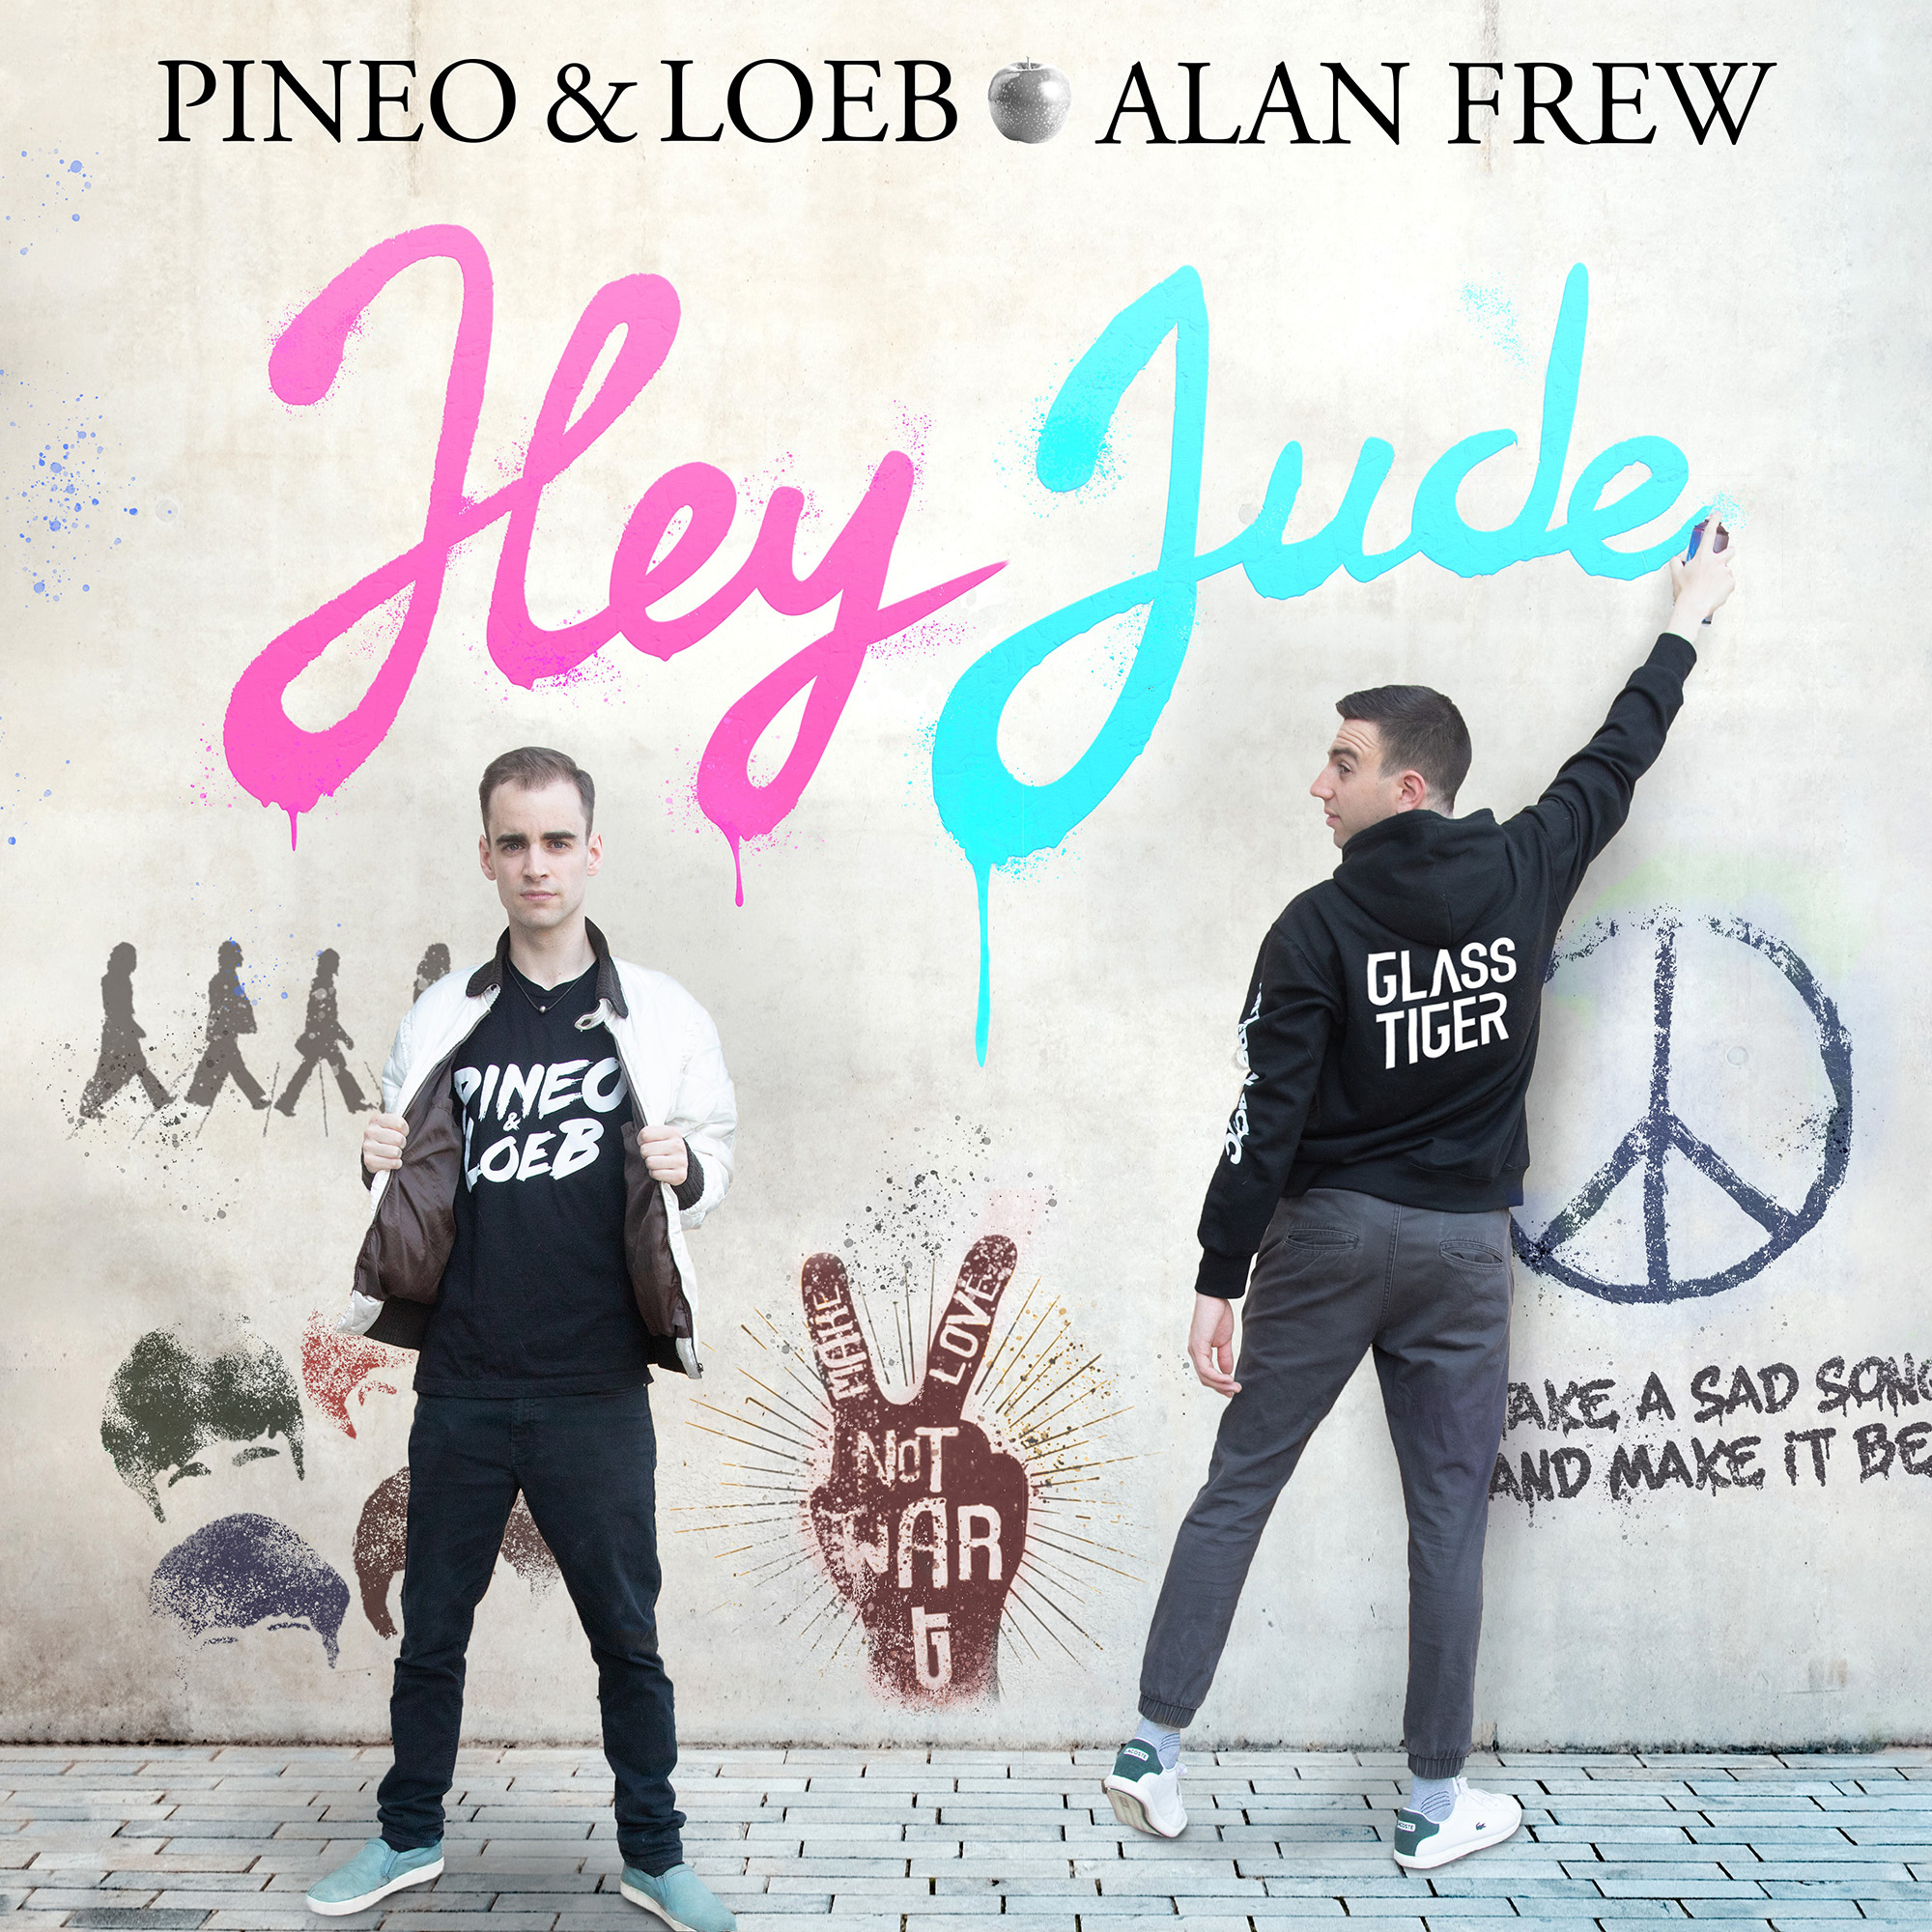 Legendary Icon Alan Frew of Glass Tiger and Pineo Loeb team up for Collaboration on “Hey Jude”